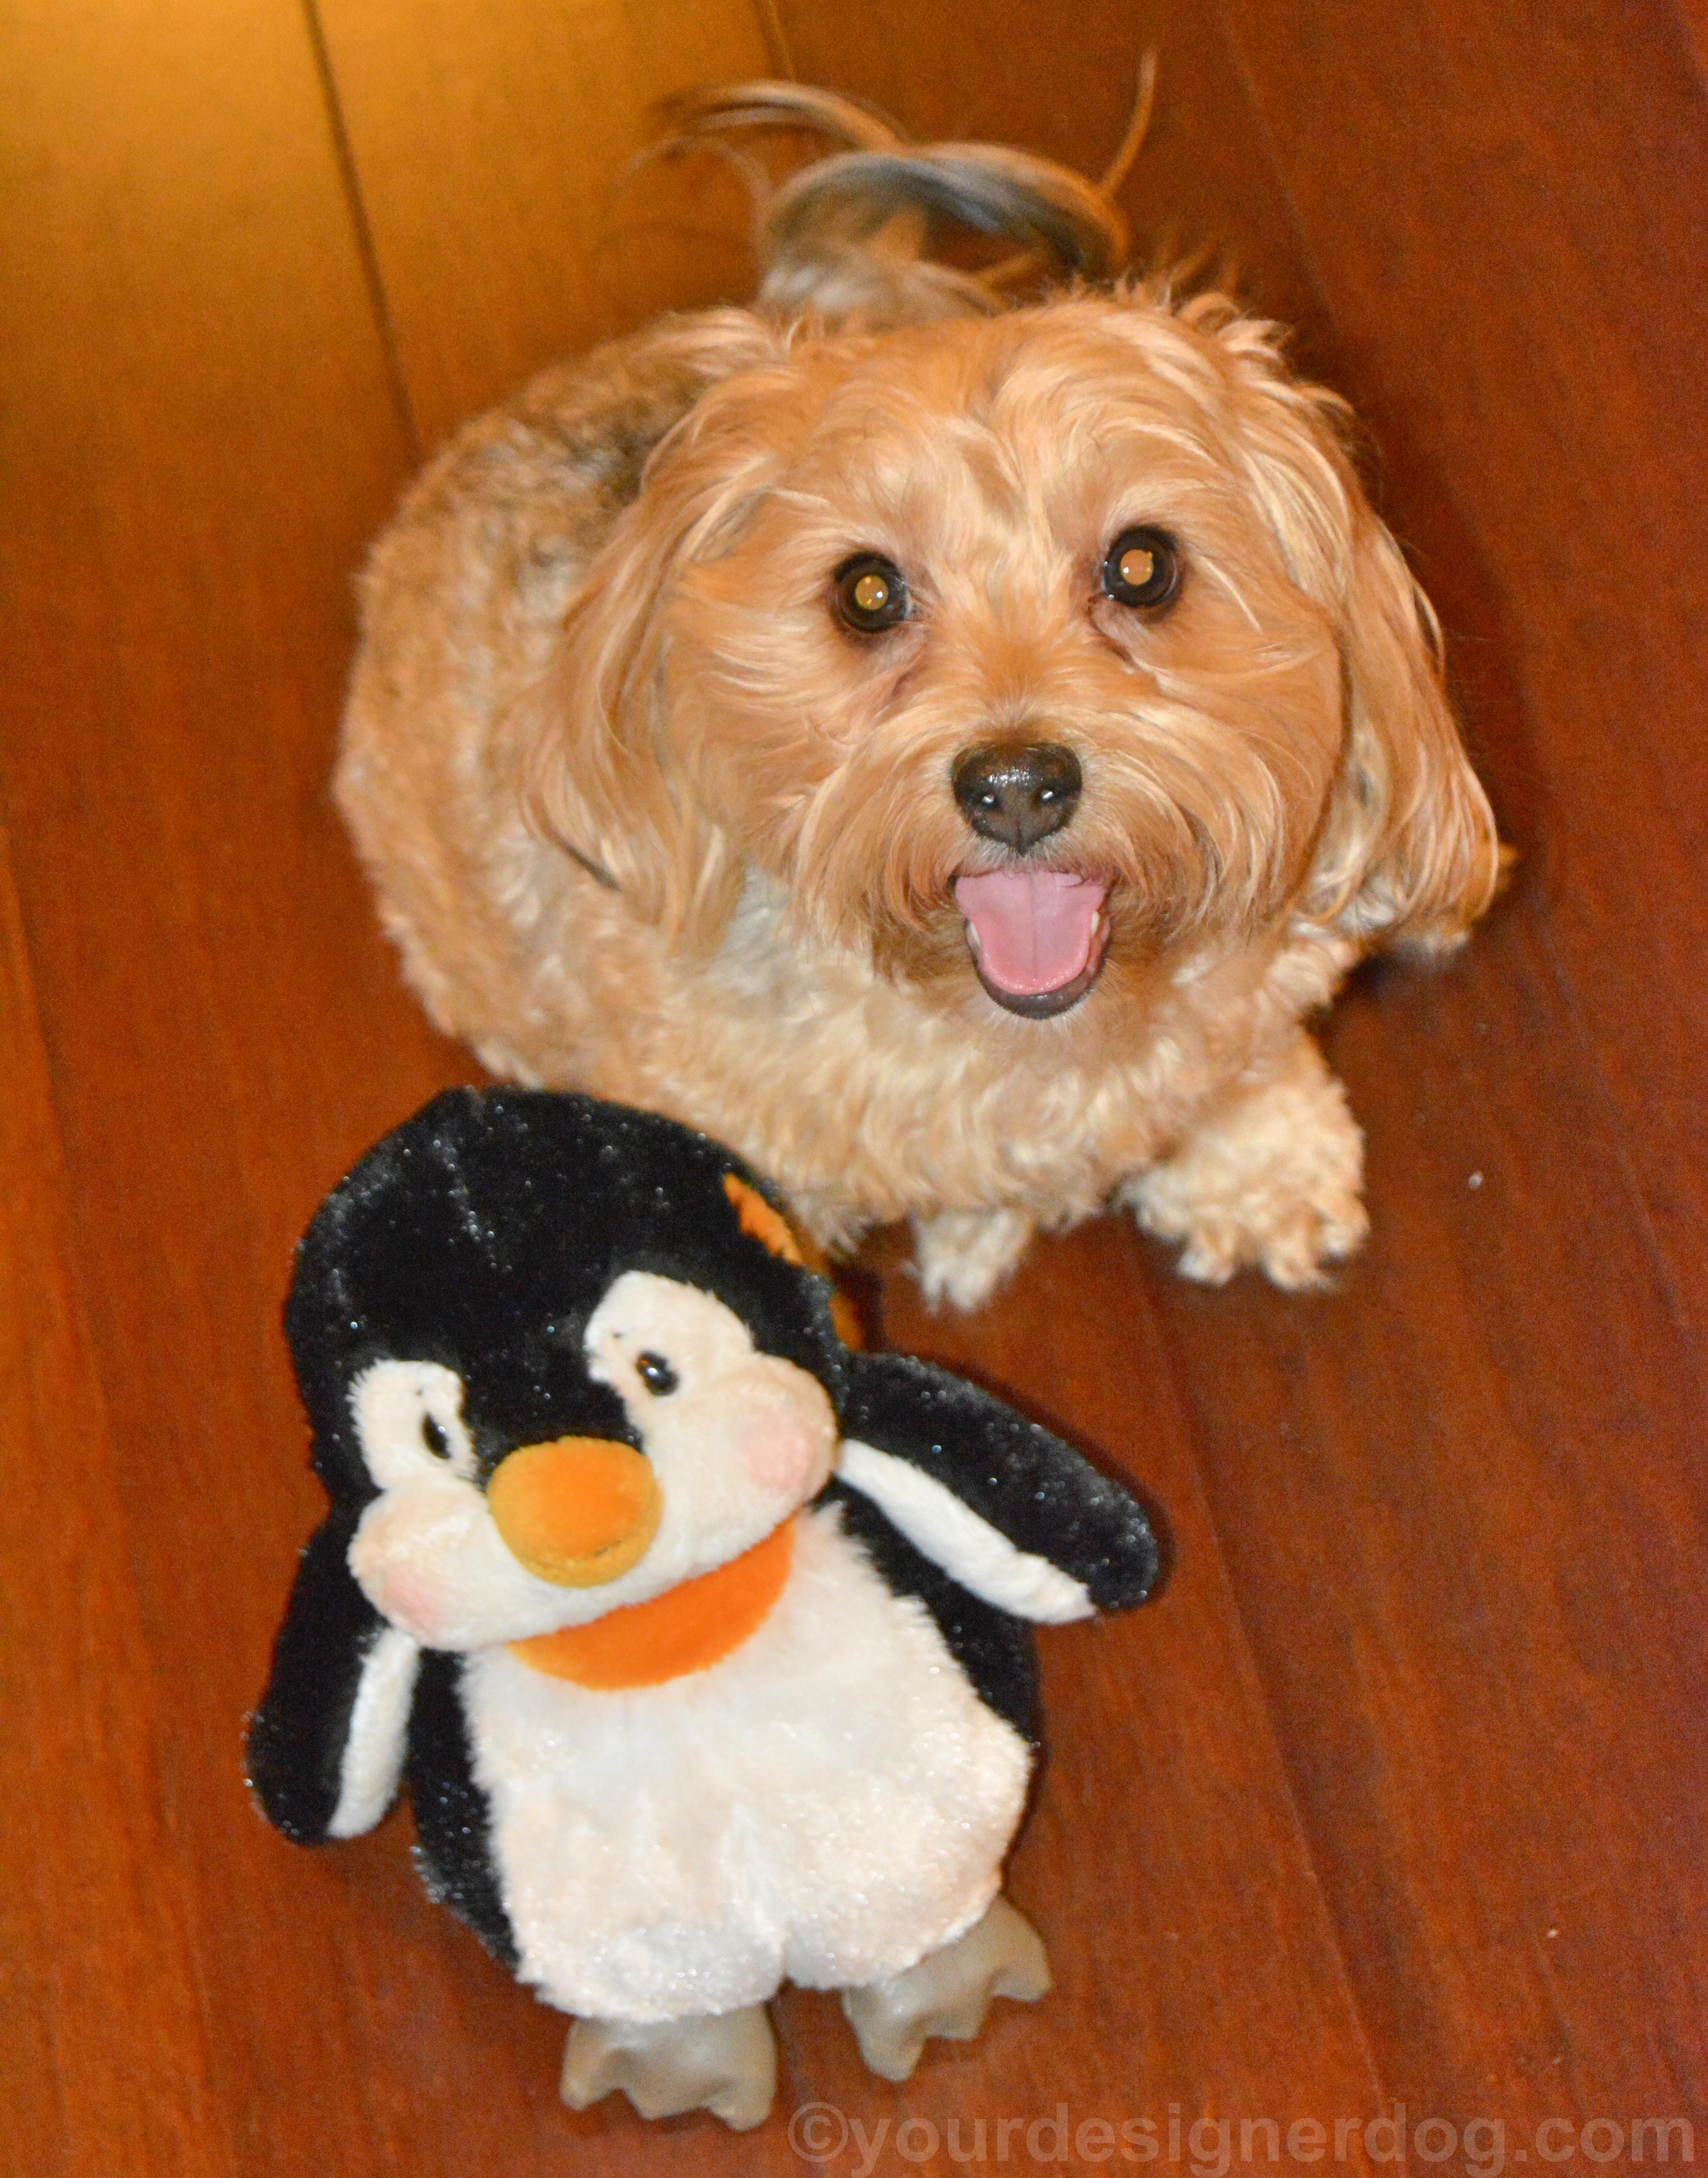 dogs, designer dogs, yorkipoo, yorkie poo, tongue out, dog smiling, penguin